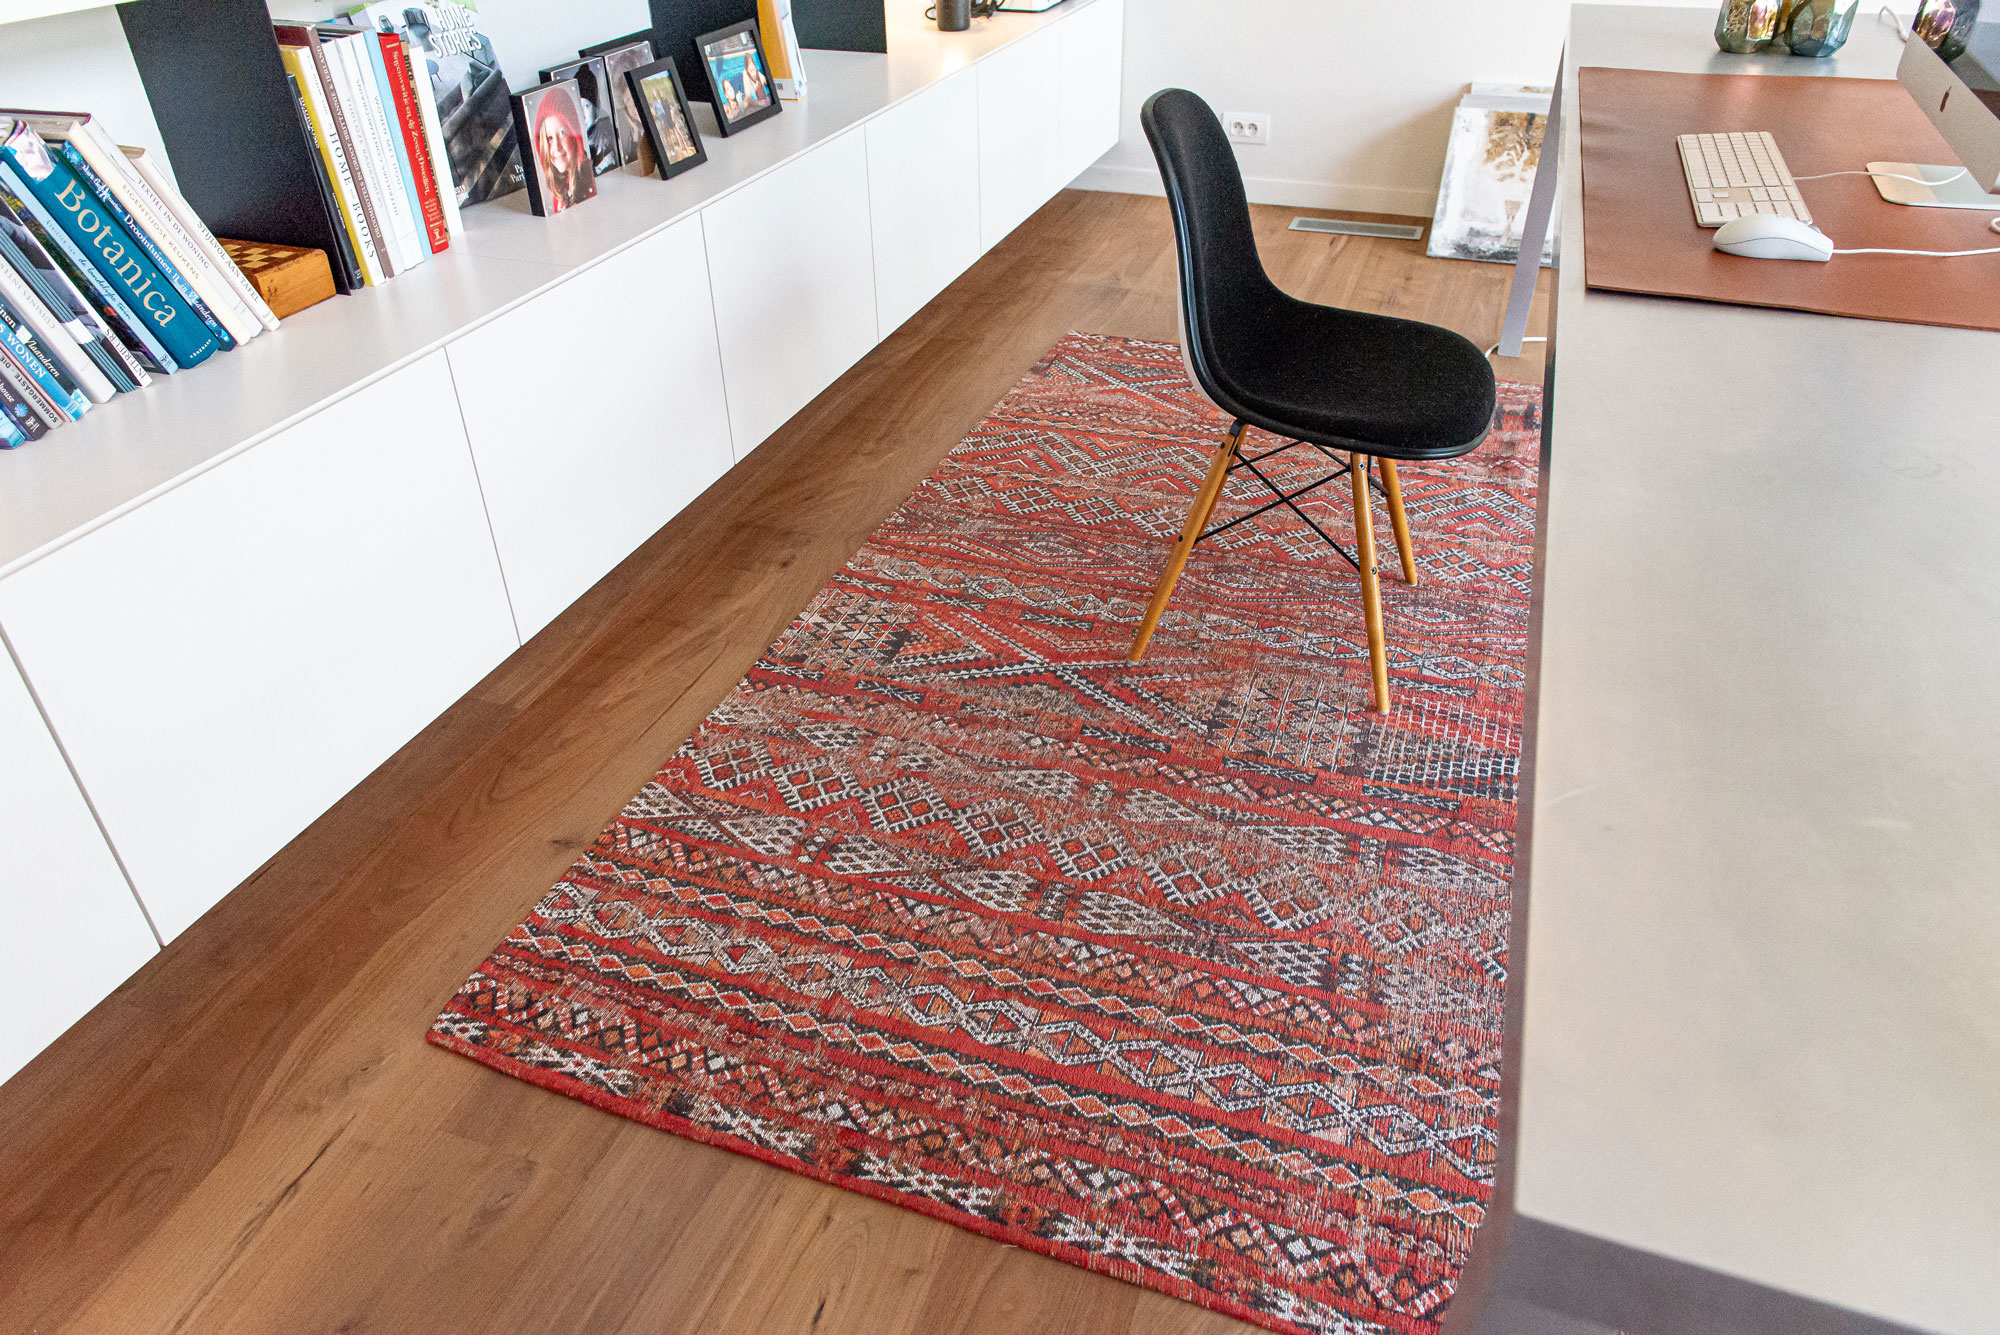 Antiquarian Flatwoven Red Rug ☞ Size: 8' x 11' 2" (240 x 340 cm)